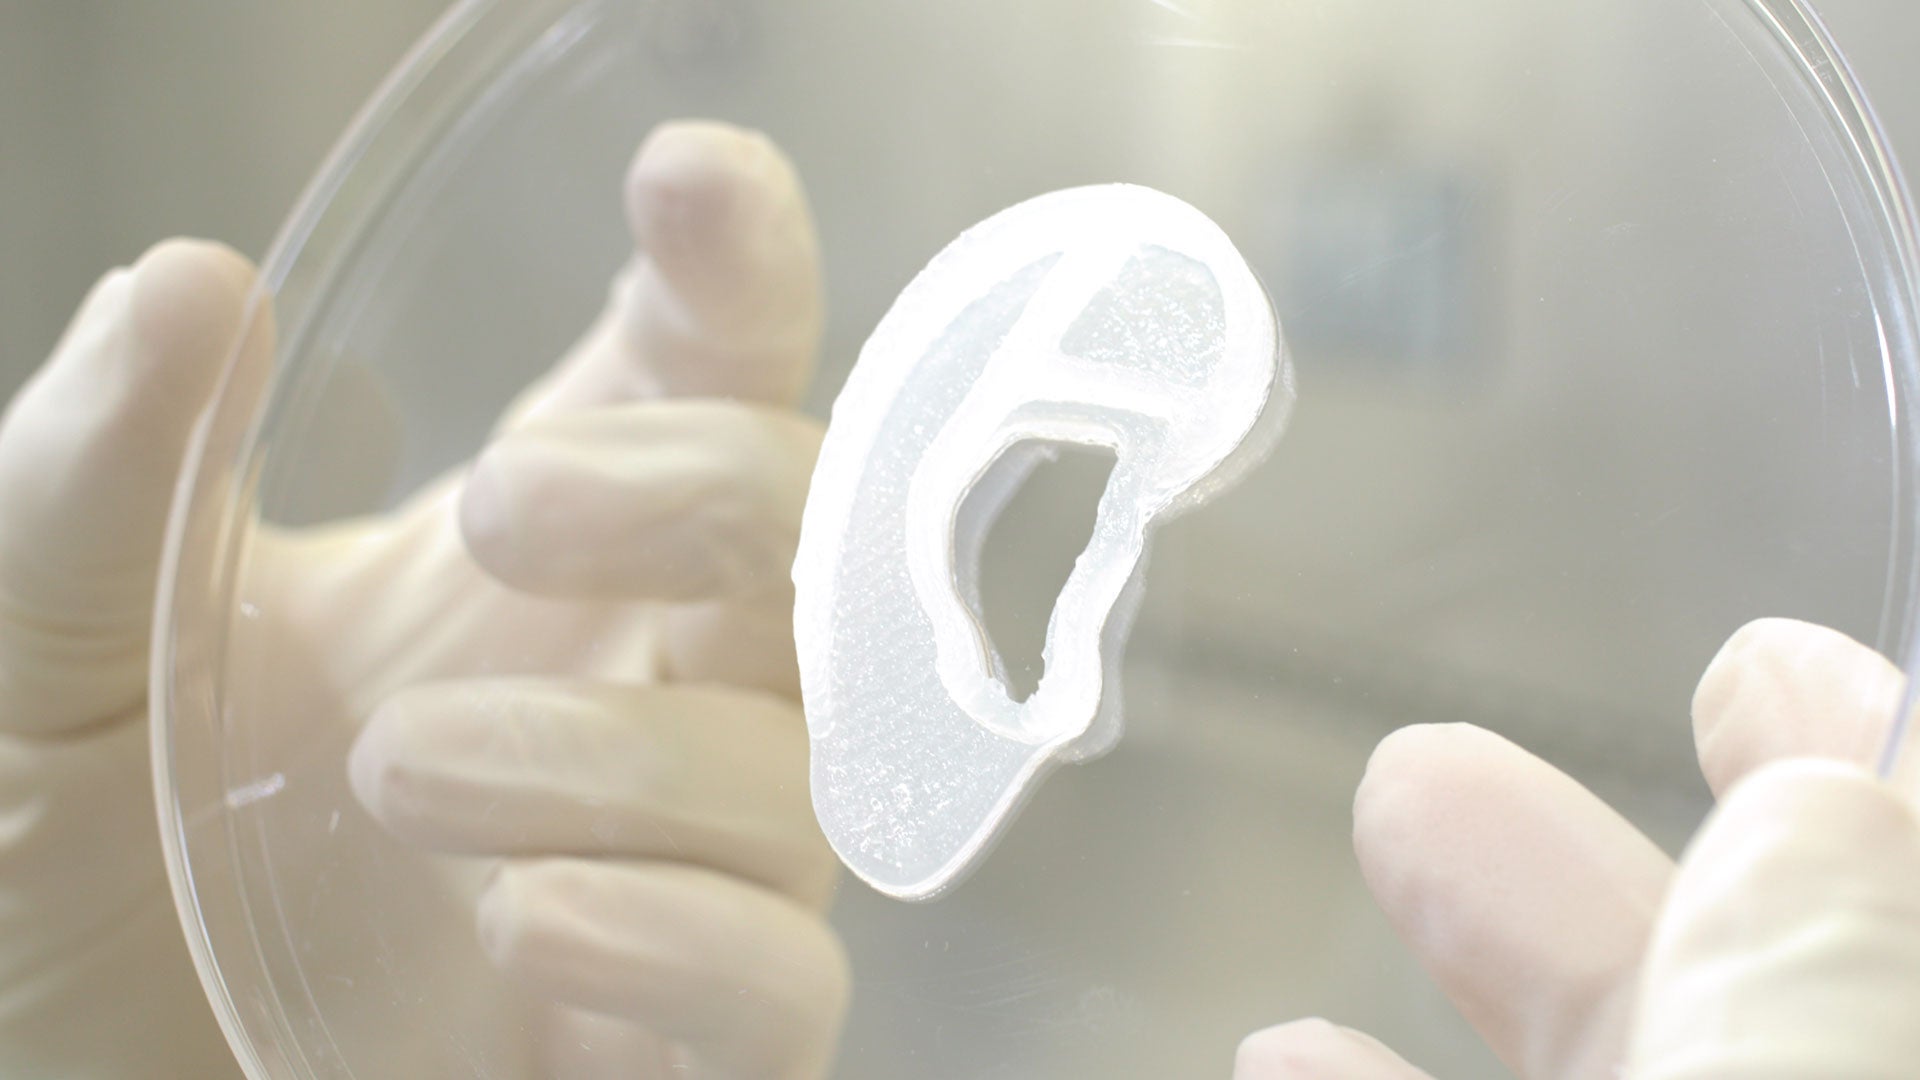 Surgeons perform human ear reconstruction surgery using 3D bioprinted living tissue implant